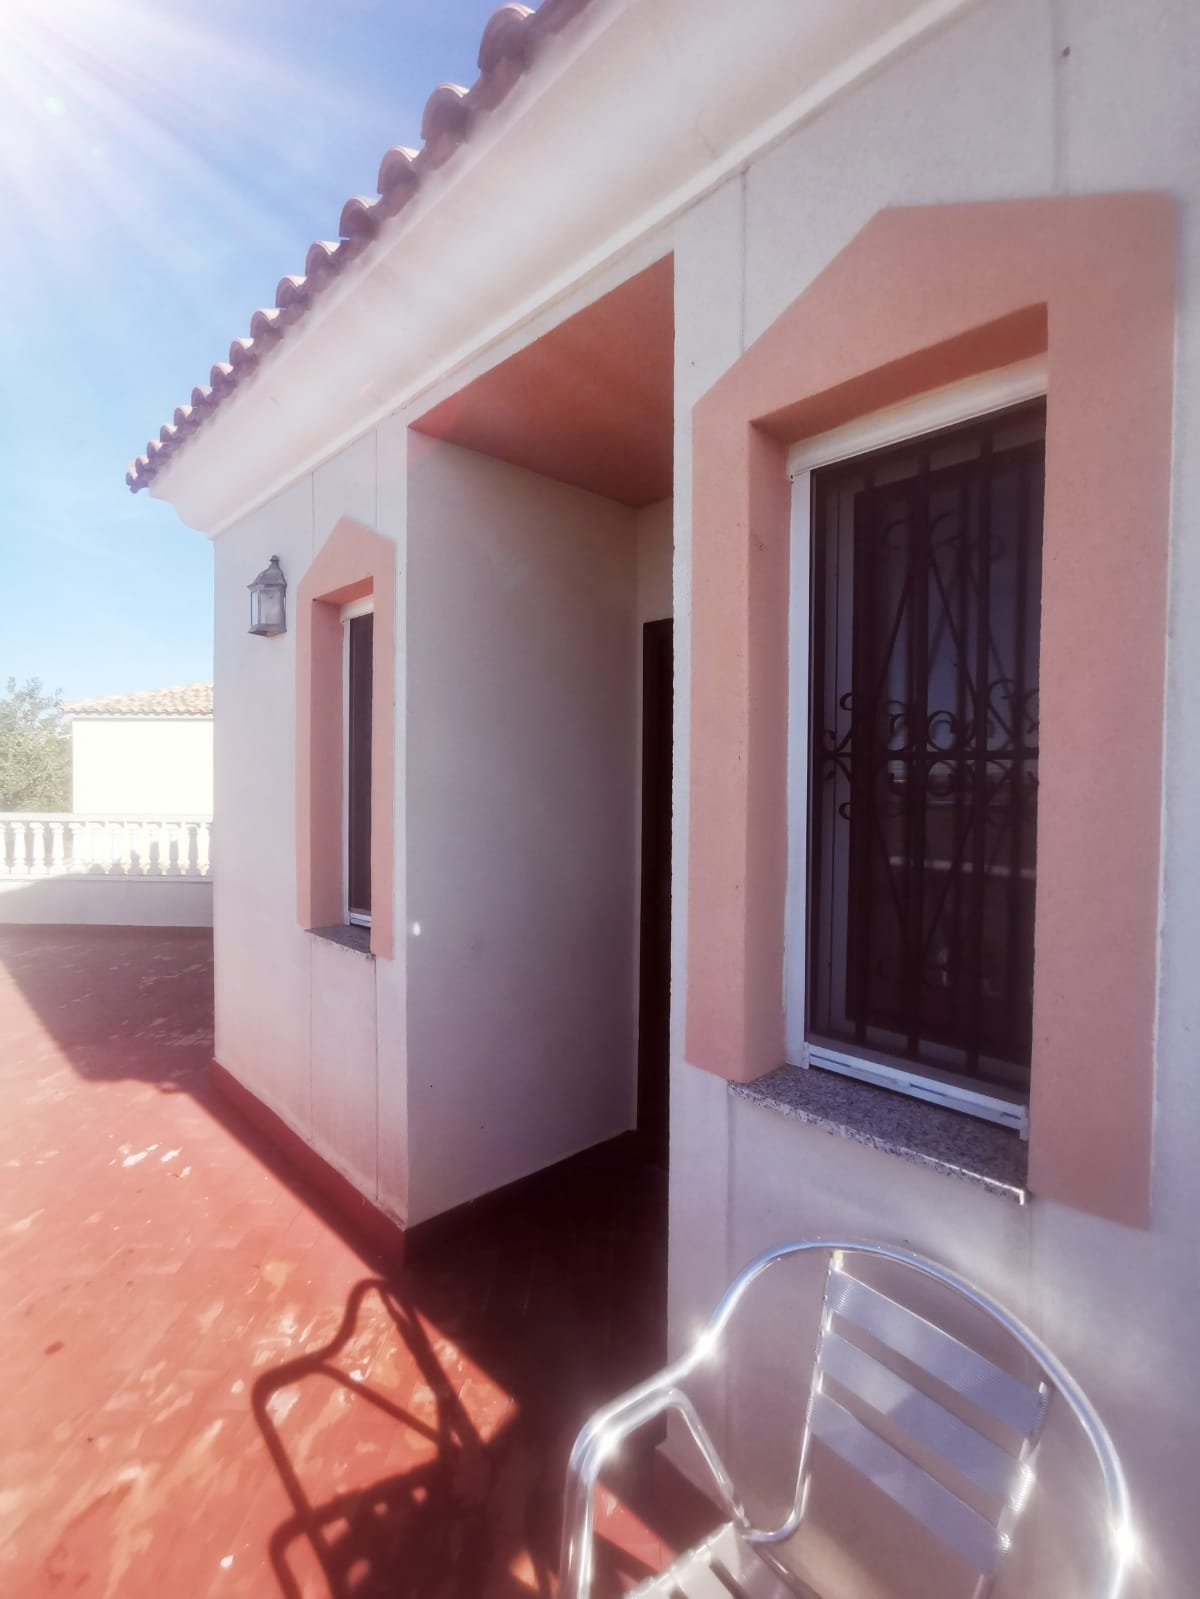 MAIN HOUSE - SMALL APARTMENT AND SECOND HOUSE AROUND THE POOL IN LOS ALCAZARES